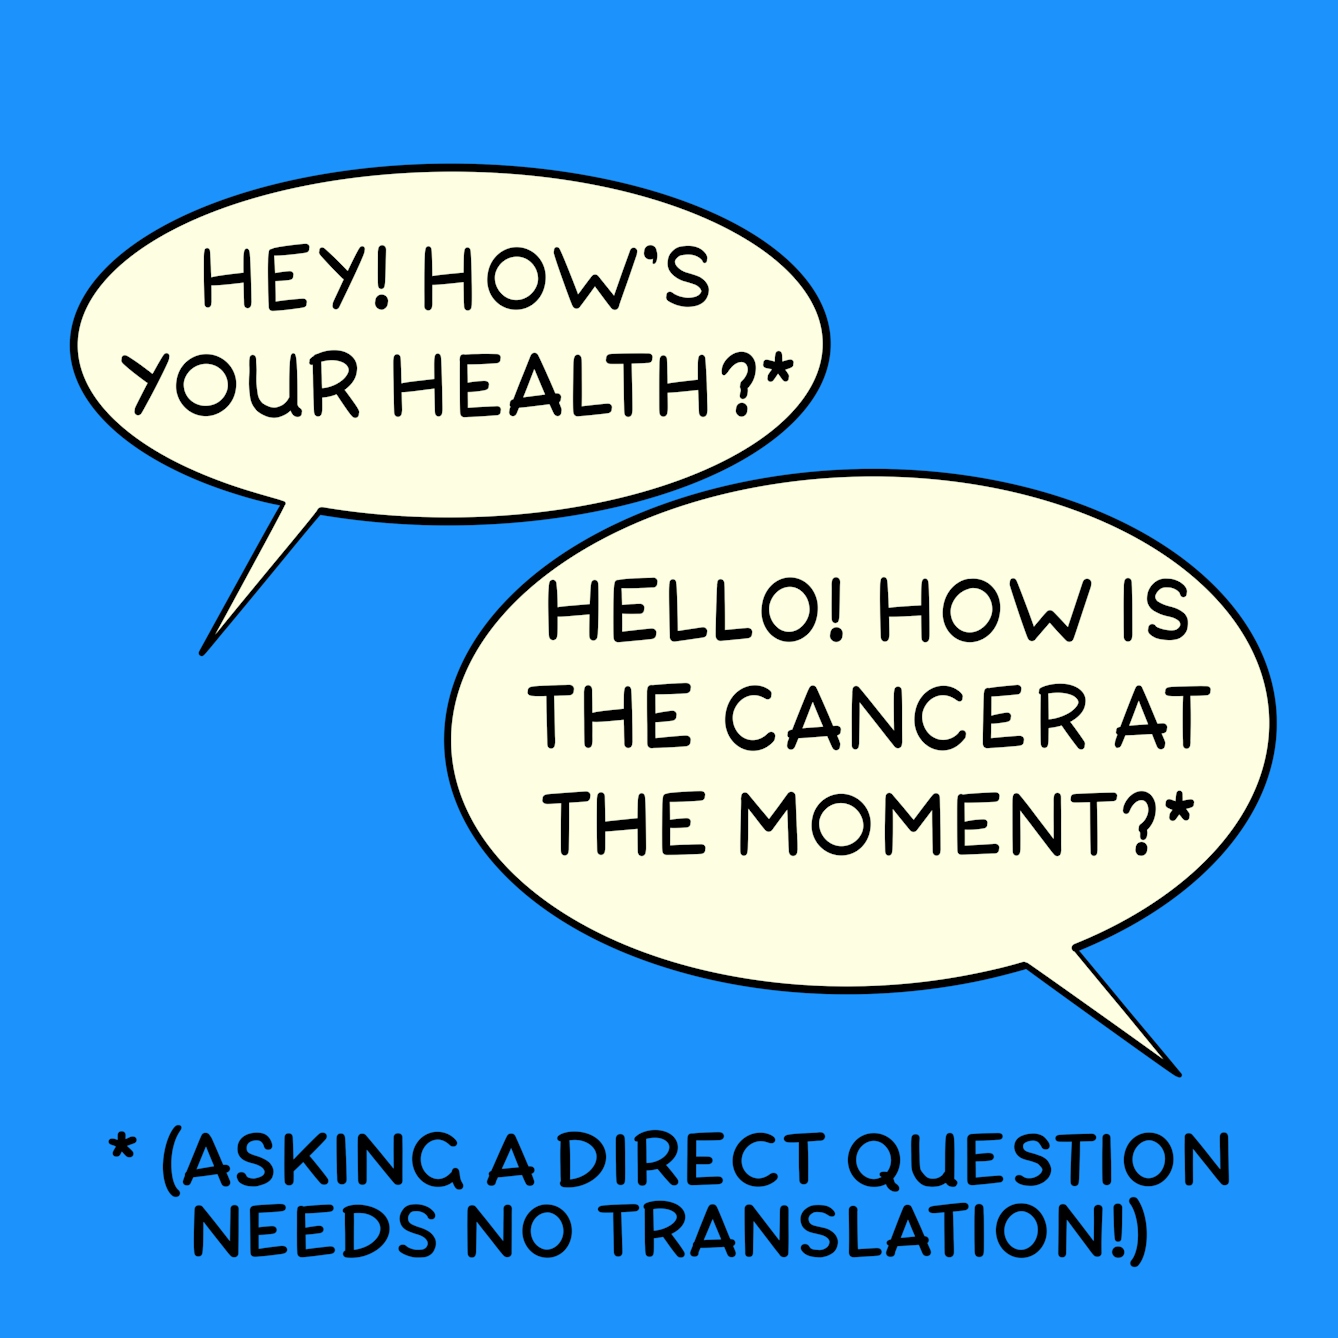 Panel 6 of a six-panel comic drawn digitally: Speech bubbles read "Hey! How's your health?*" and "Hello! How is the cancer at the moment?*". The asterisk below says "(Asking a direct question needs no translation!)